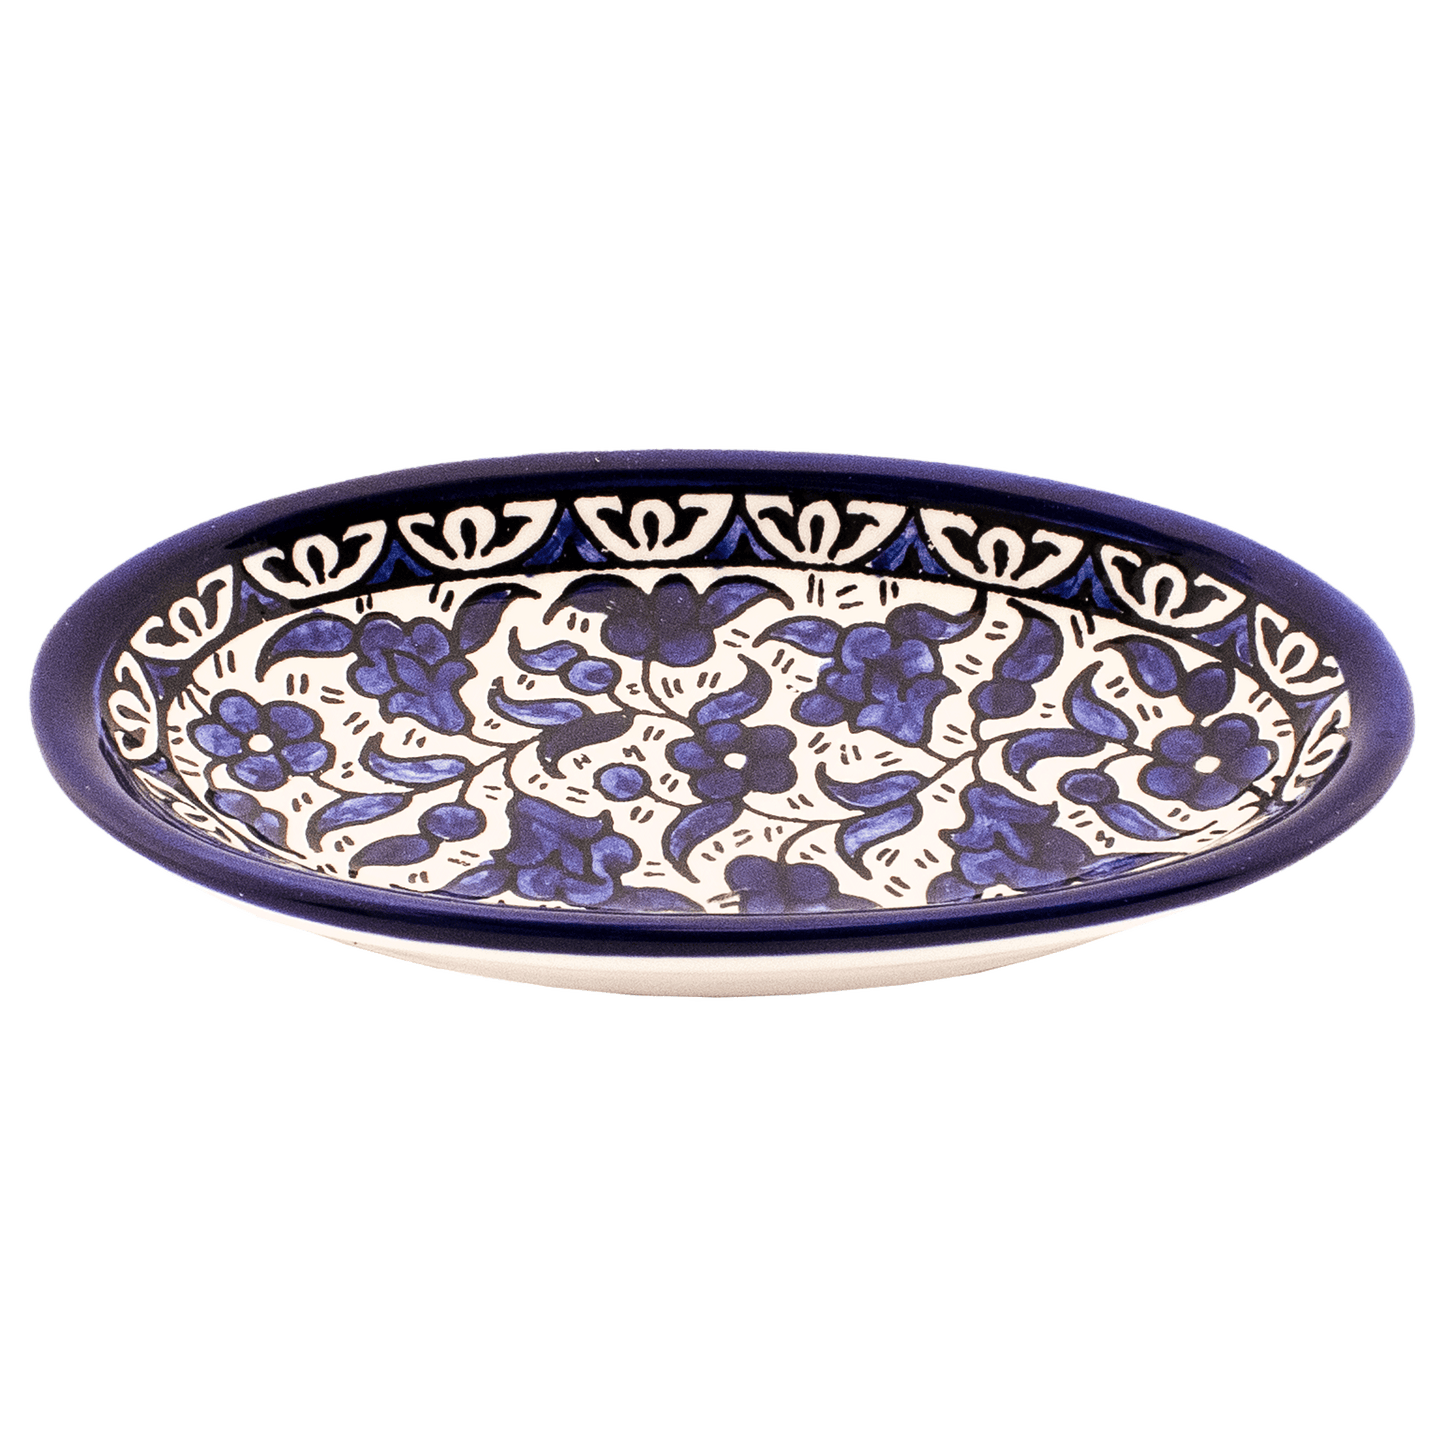 Small oval ceramic serving dish Blue floral pattern